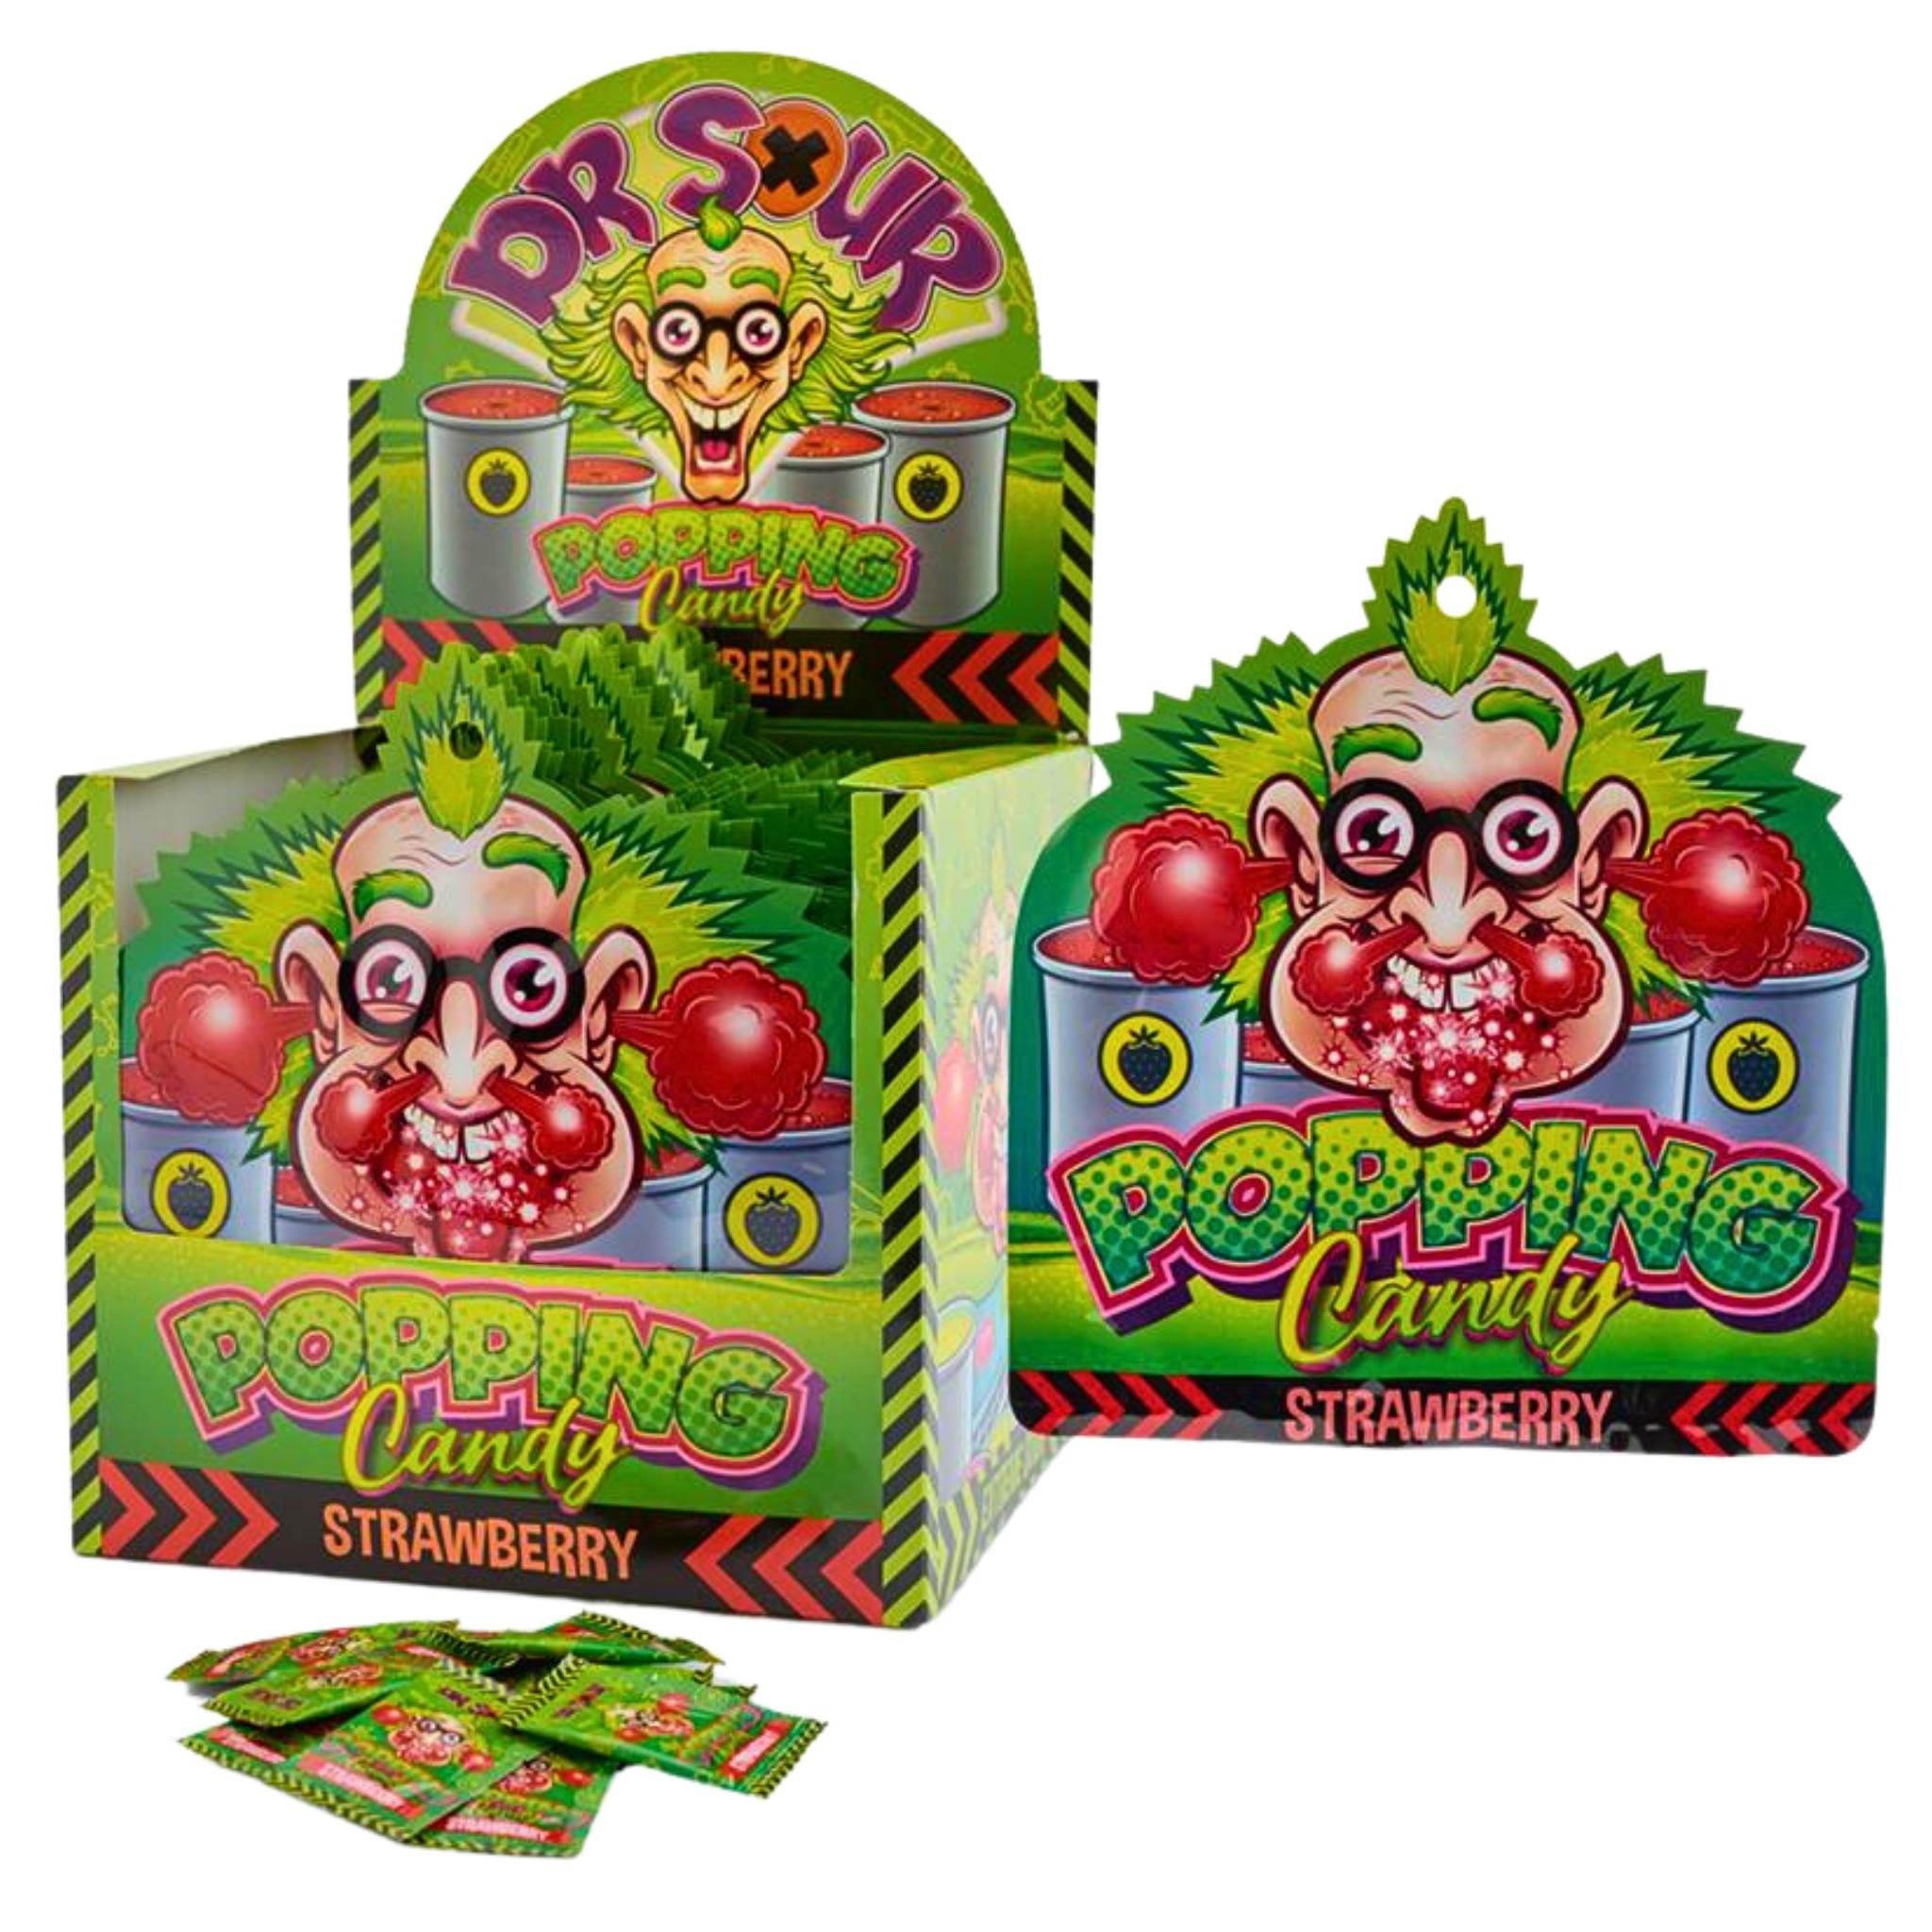 Dr Sour Popping Candy Strawberry - 15g